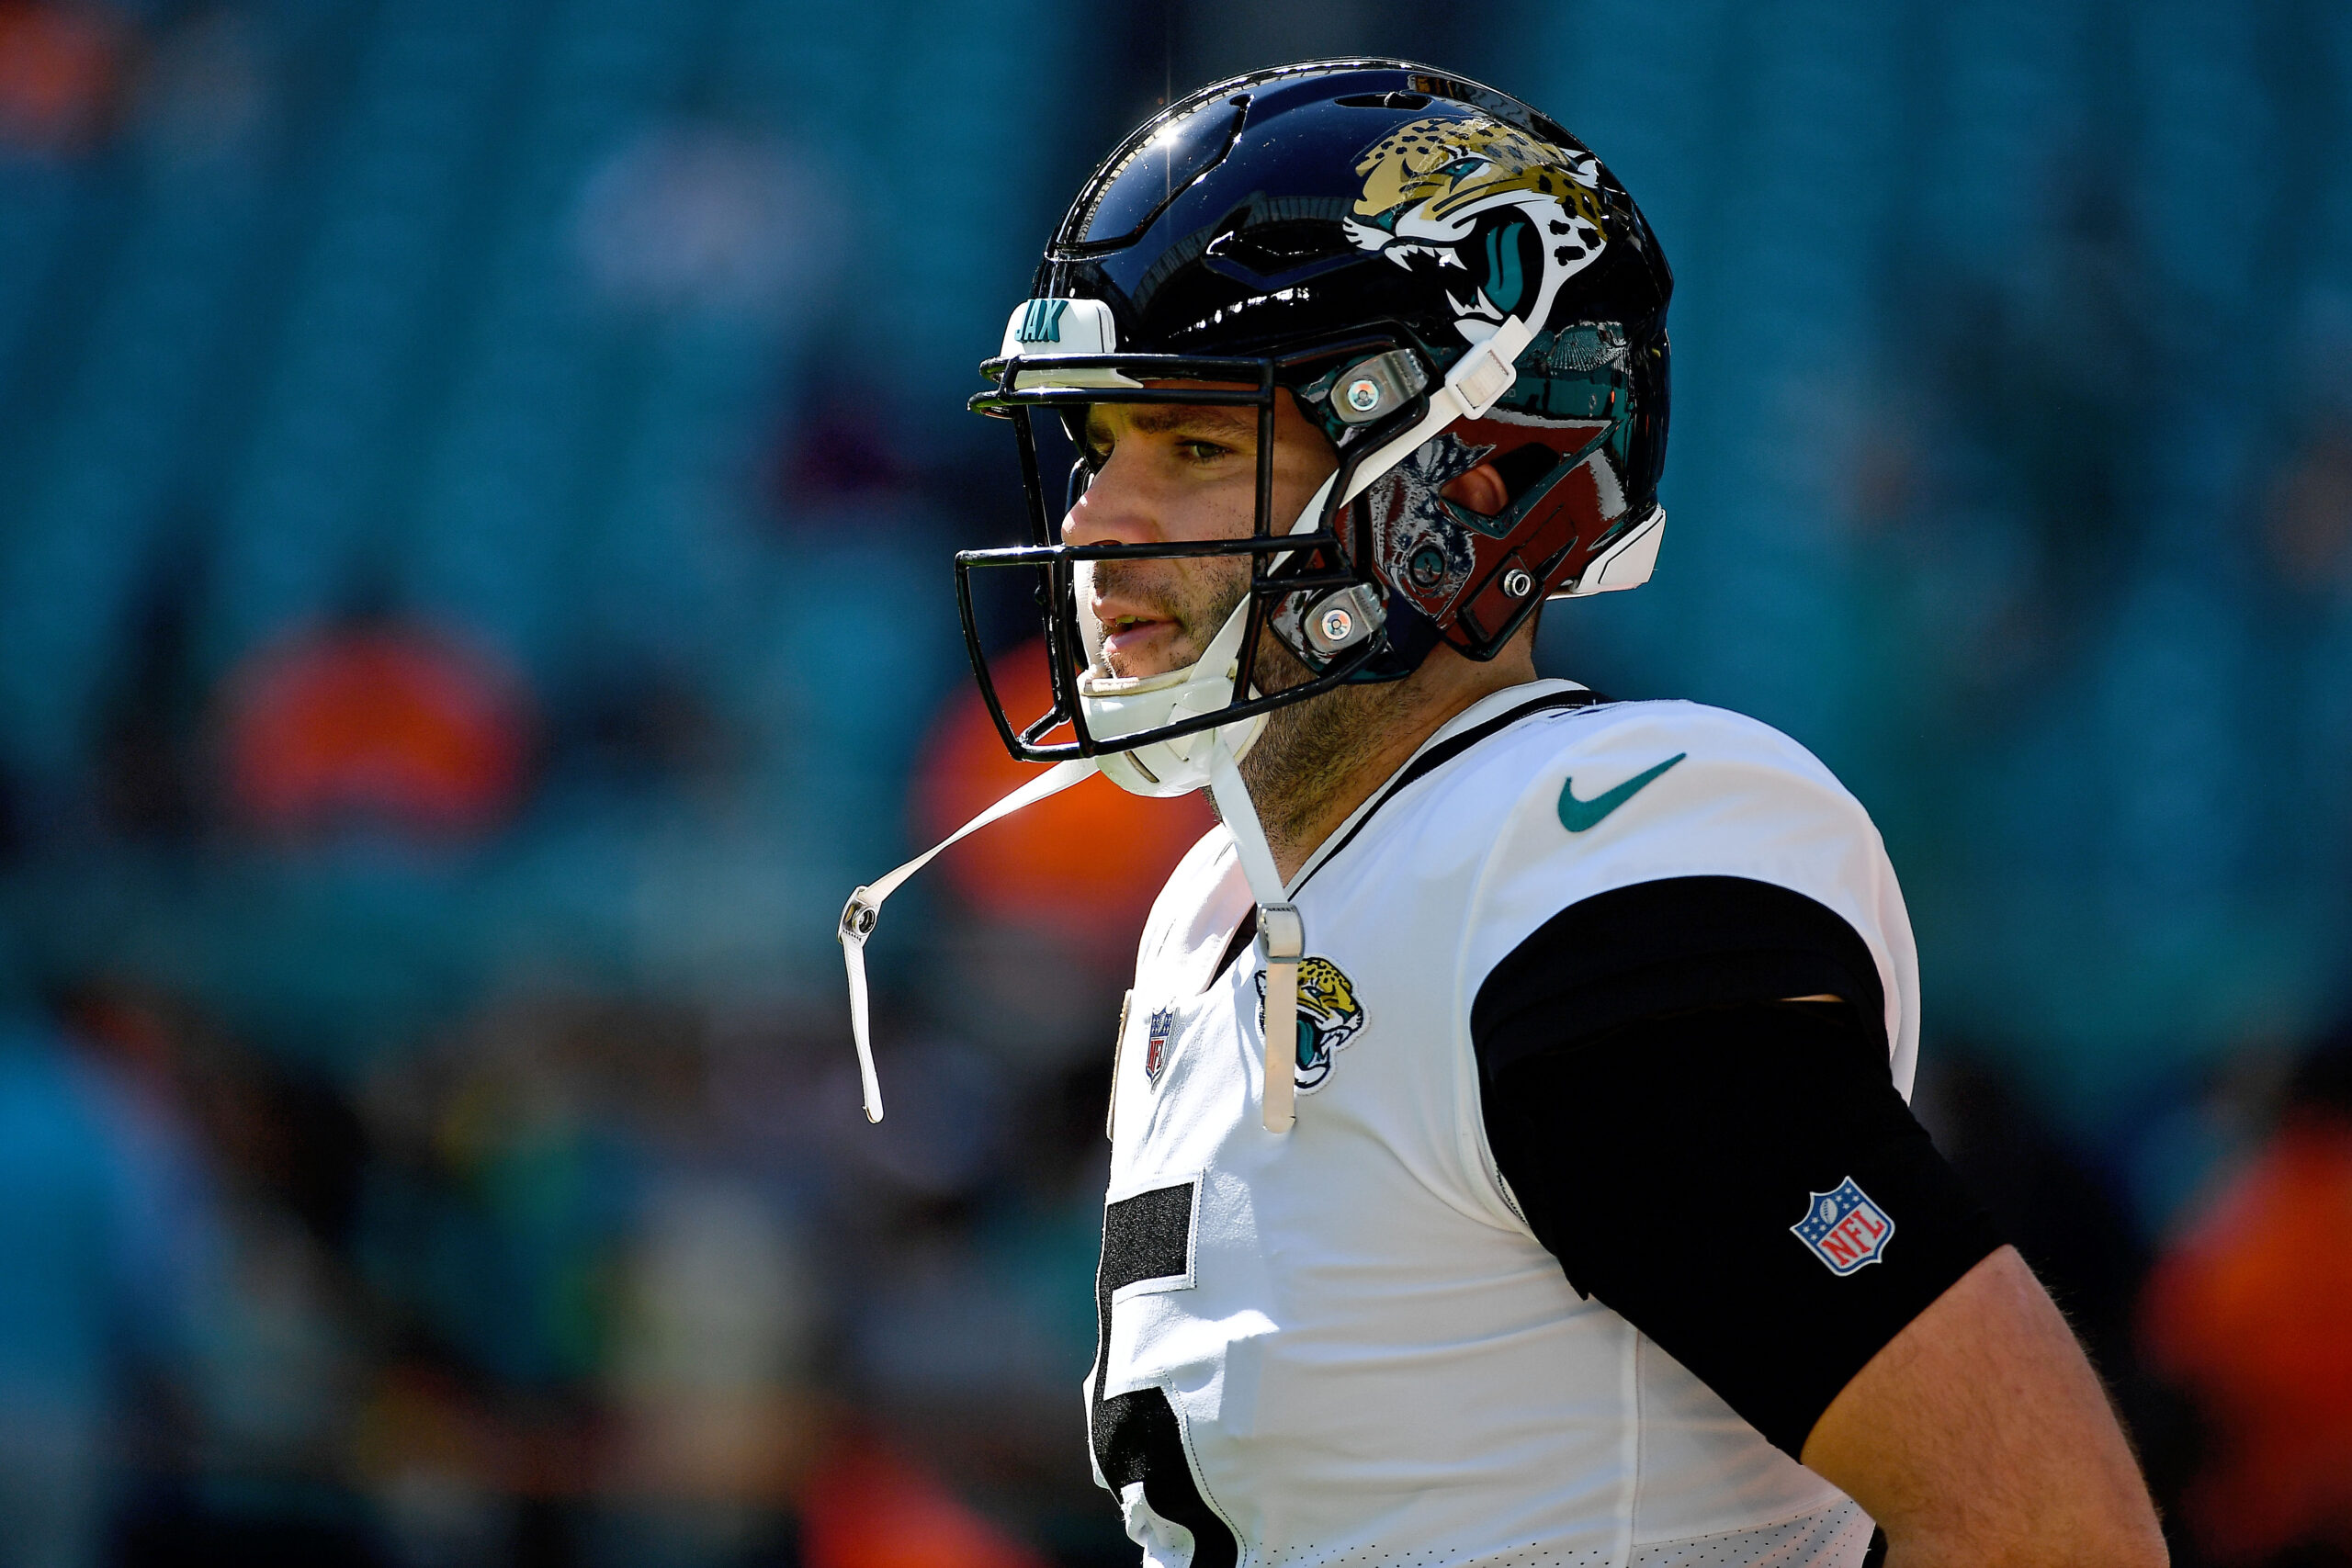 Former Jags first-round selection Blake Bortles granted release from Saints